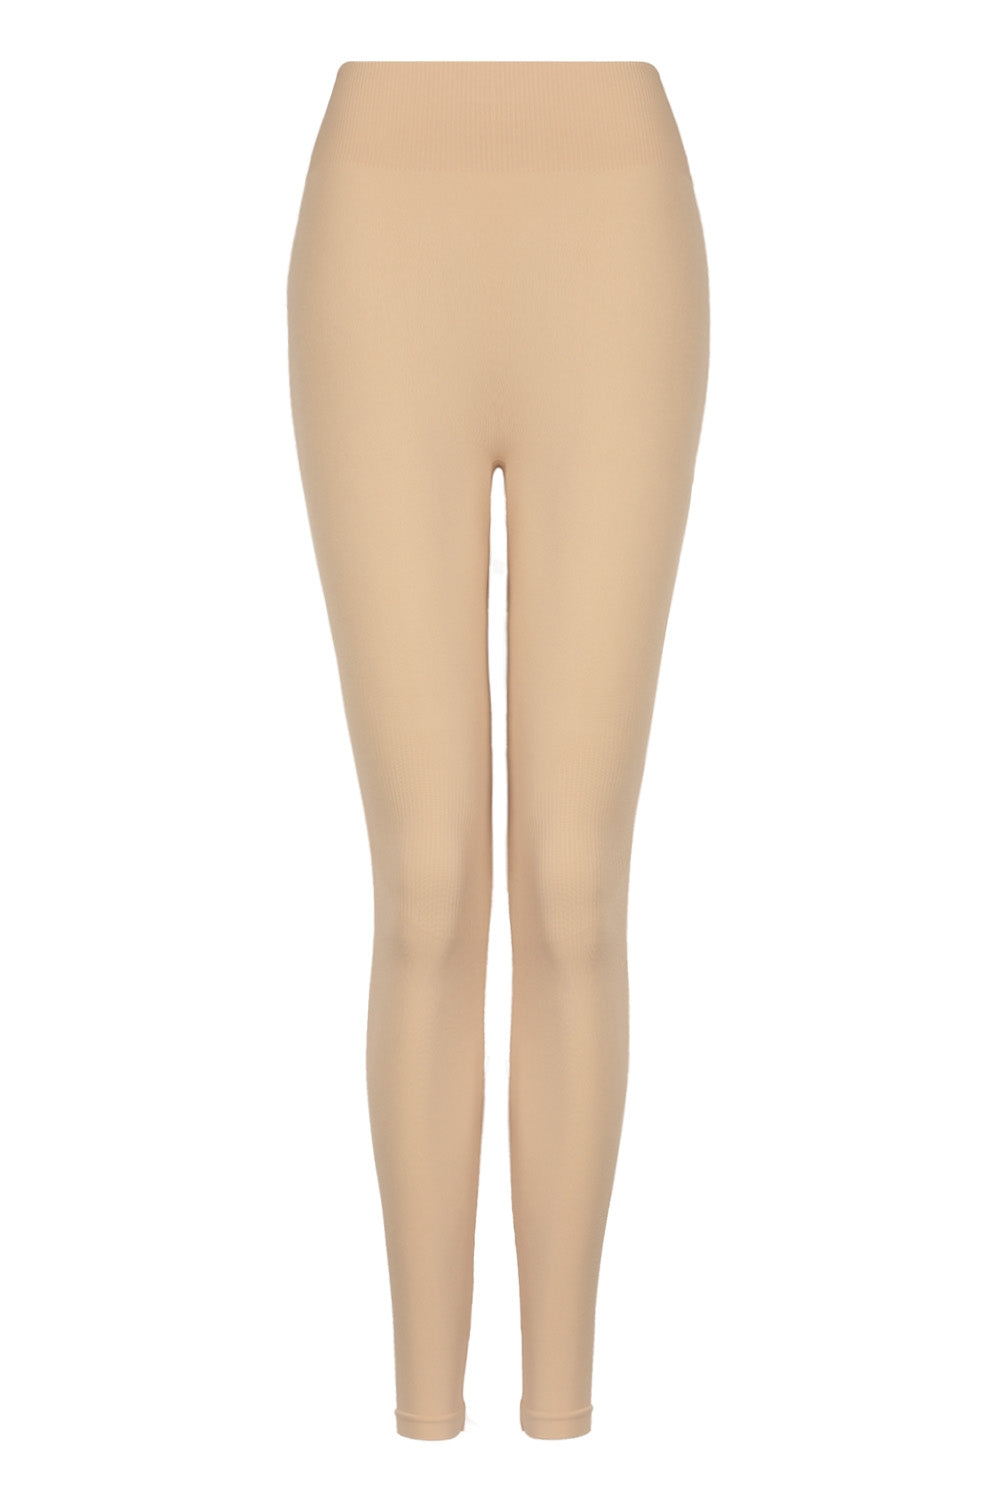 Beige Cotton Legging – Zubix : Clothing, Accessories and Home Furnishing  Shop Online